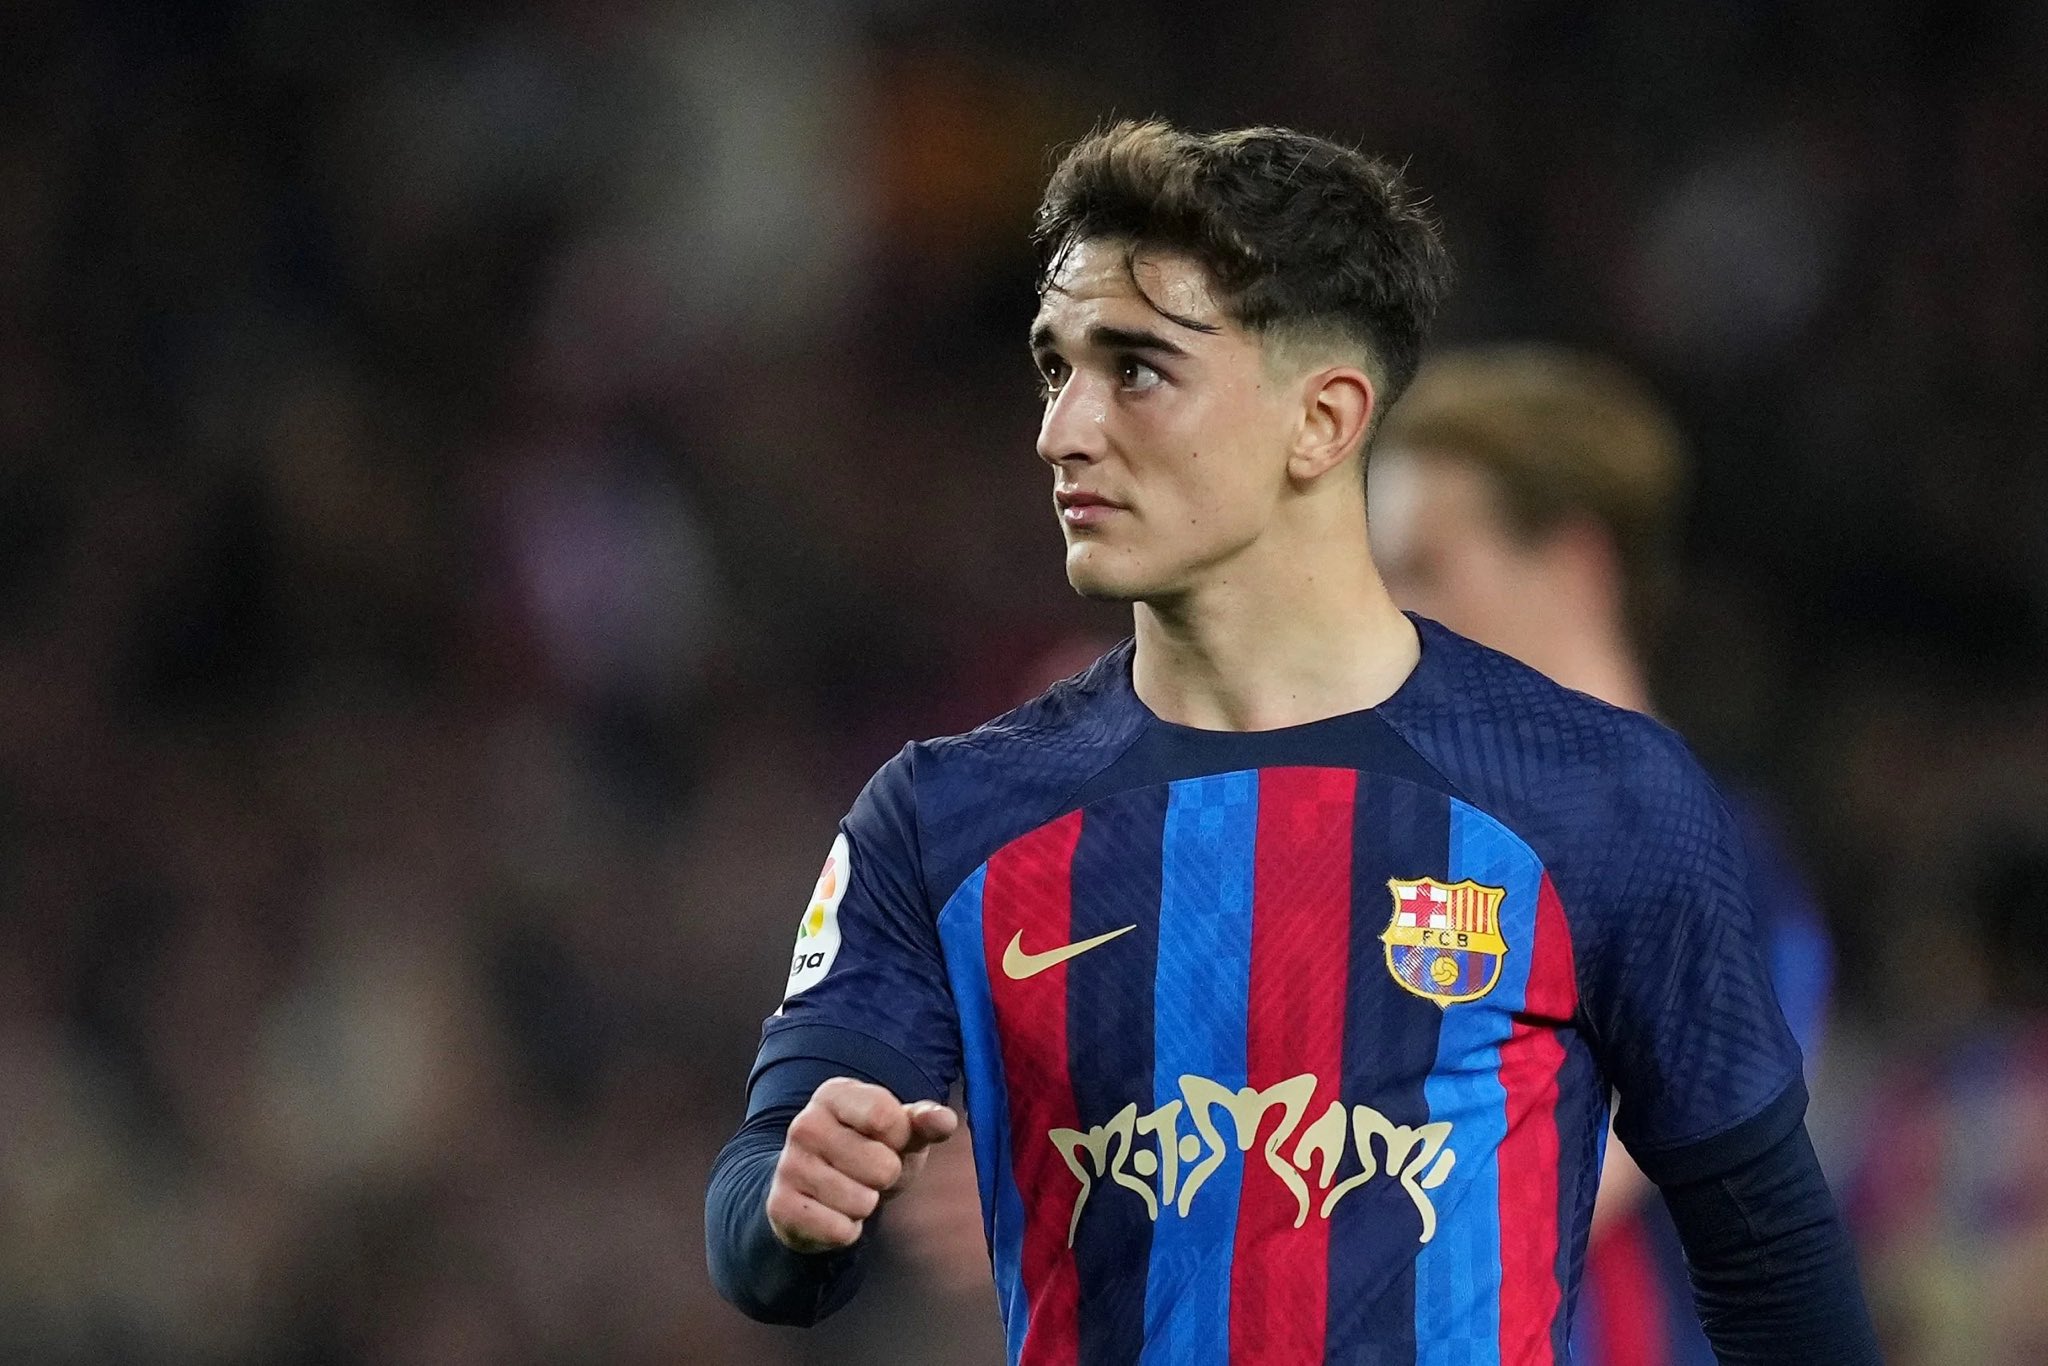 Barcelona Transfer News: "This Will Be A Huge Disaster For Barcelona" - Bayern Munich Is Ready To Steal Barcelona's €90m Worth Player For FREE